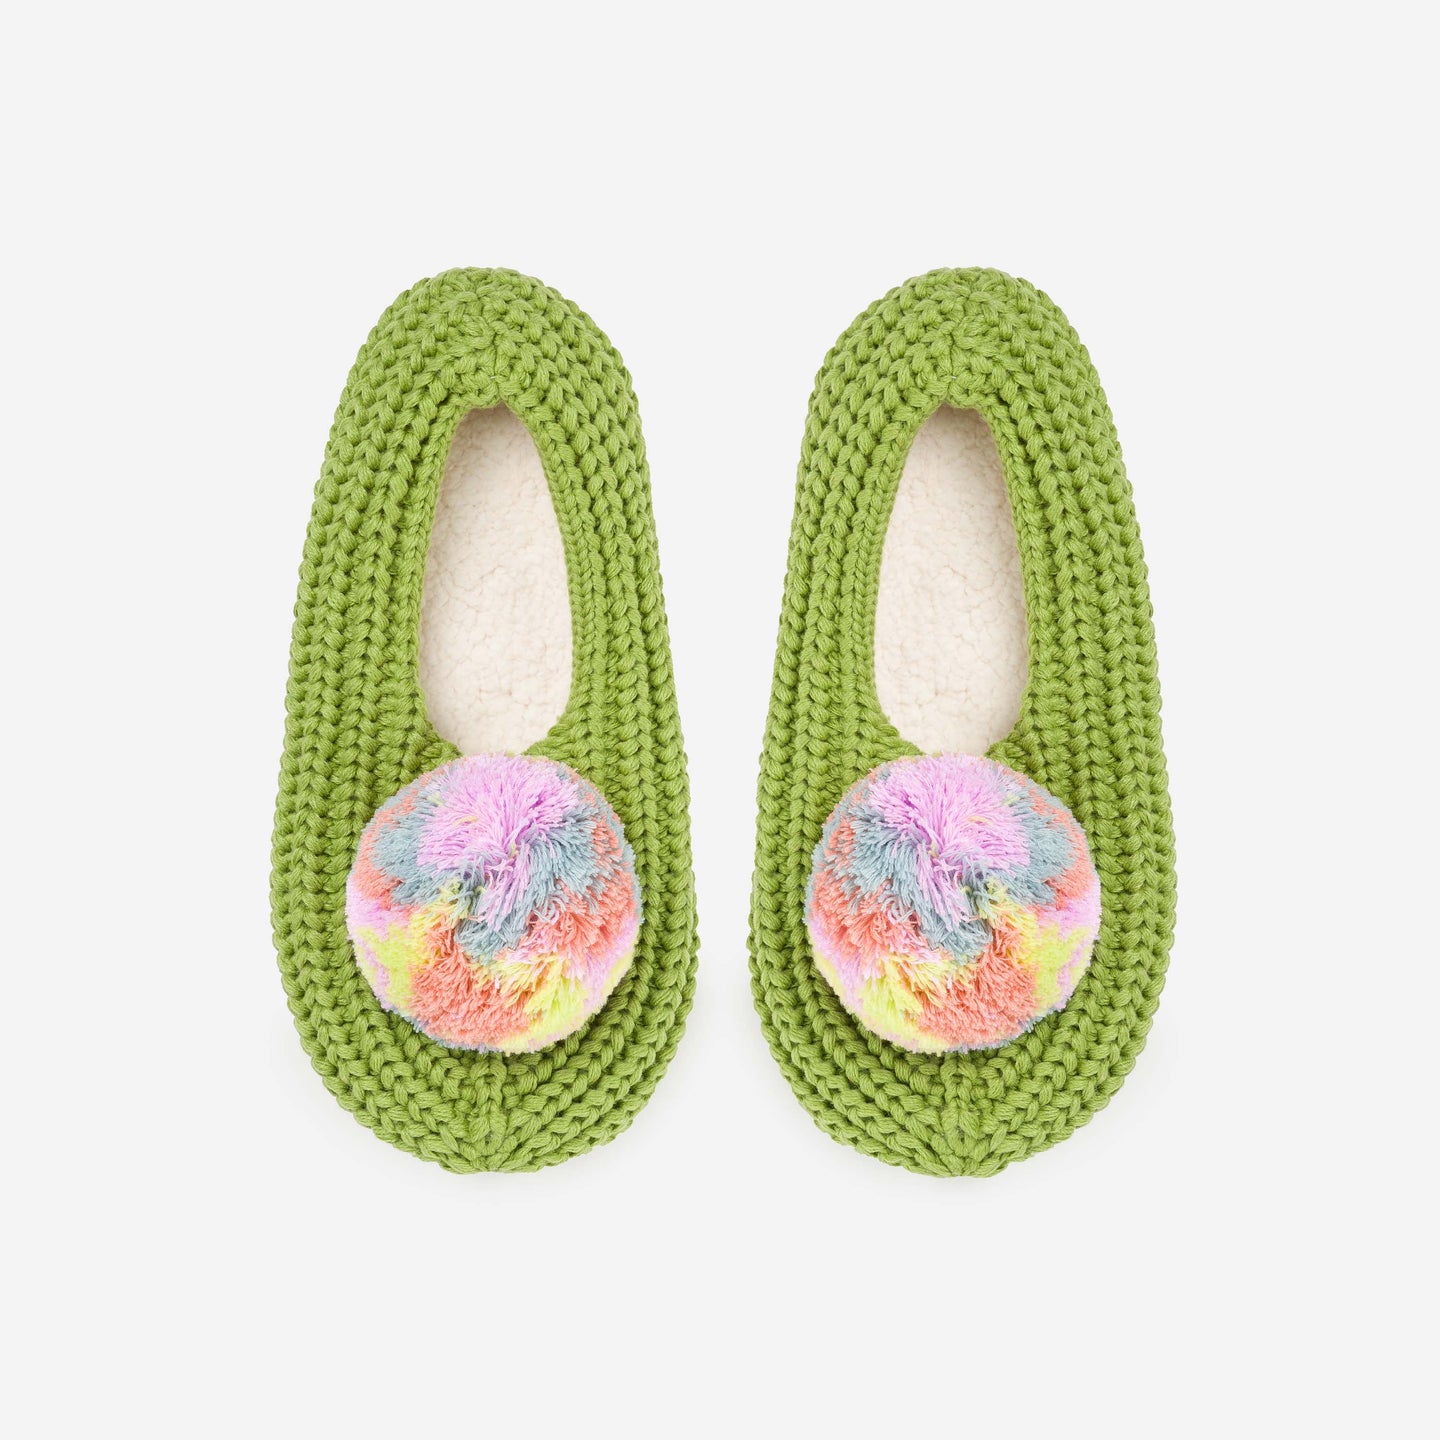 Marble Pommed Rib Knit Indoor Slippers